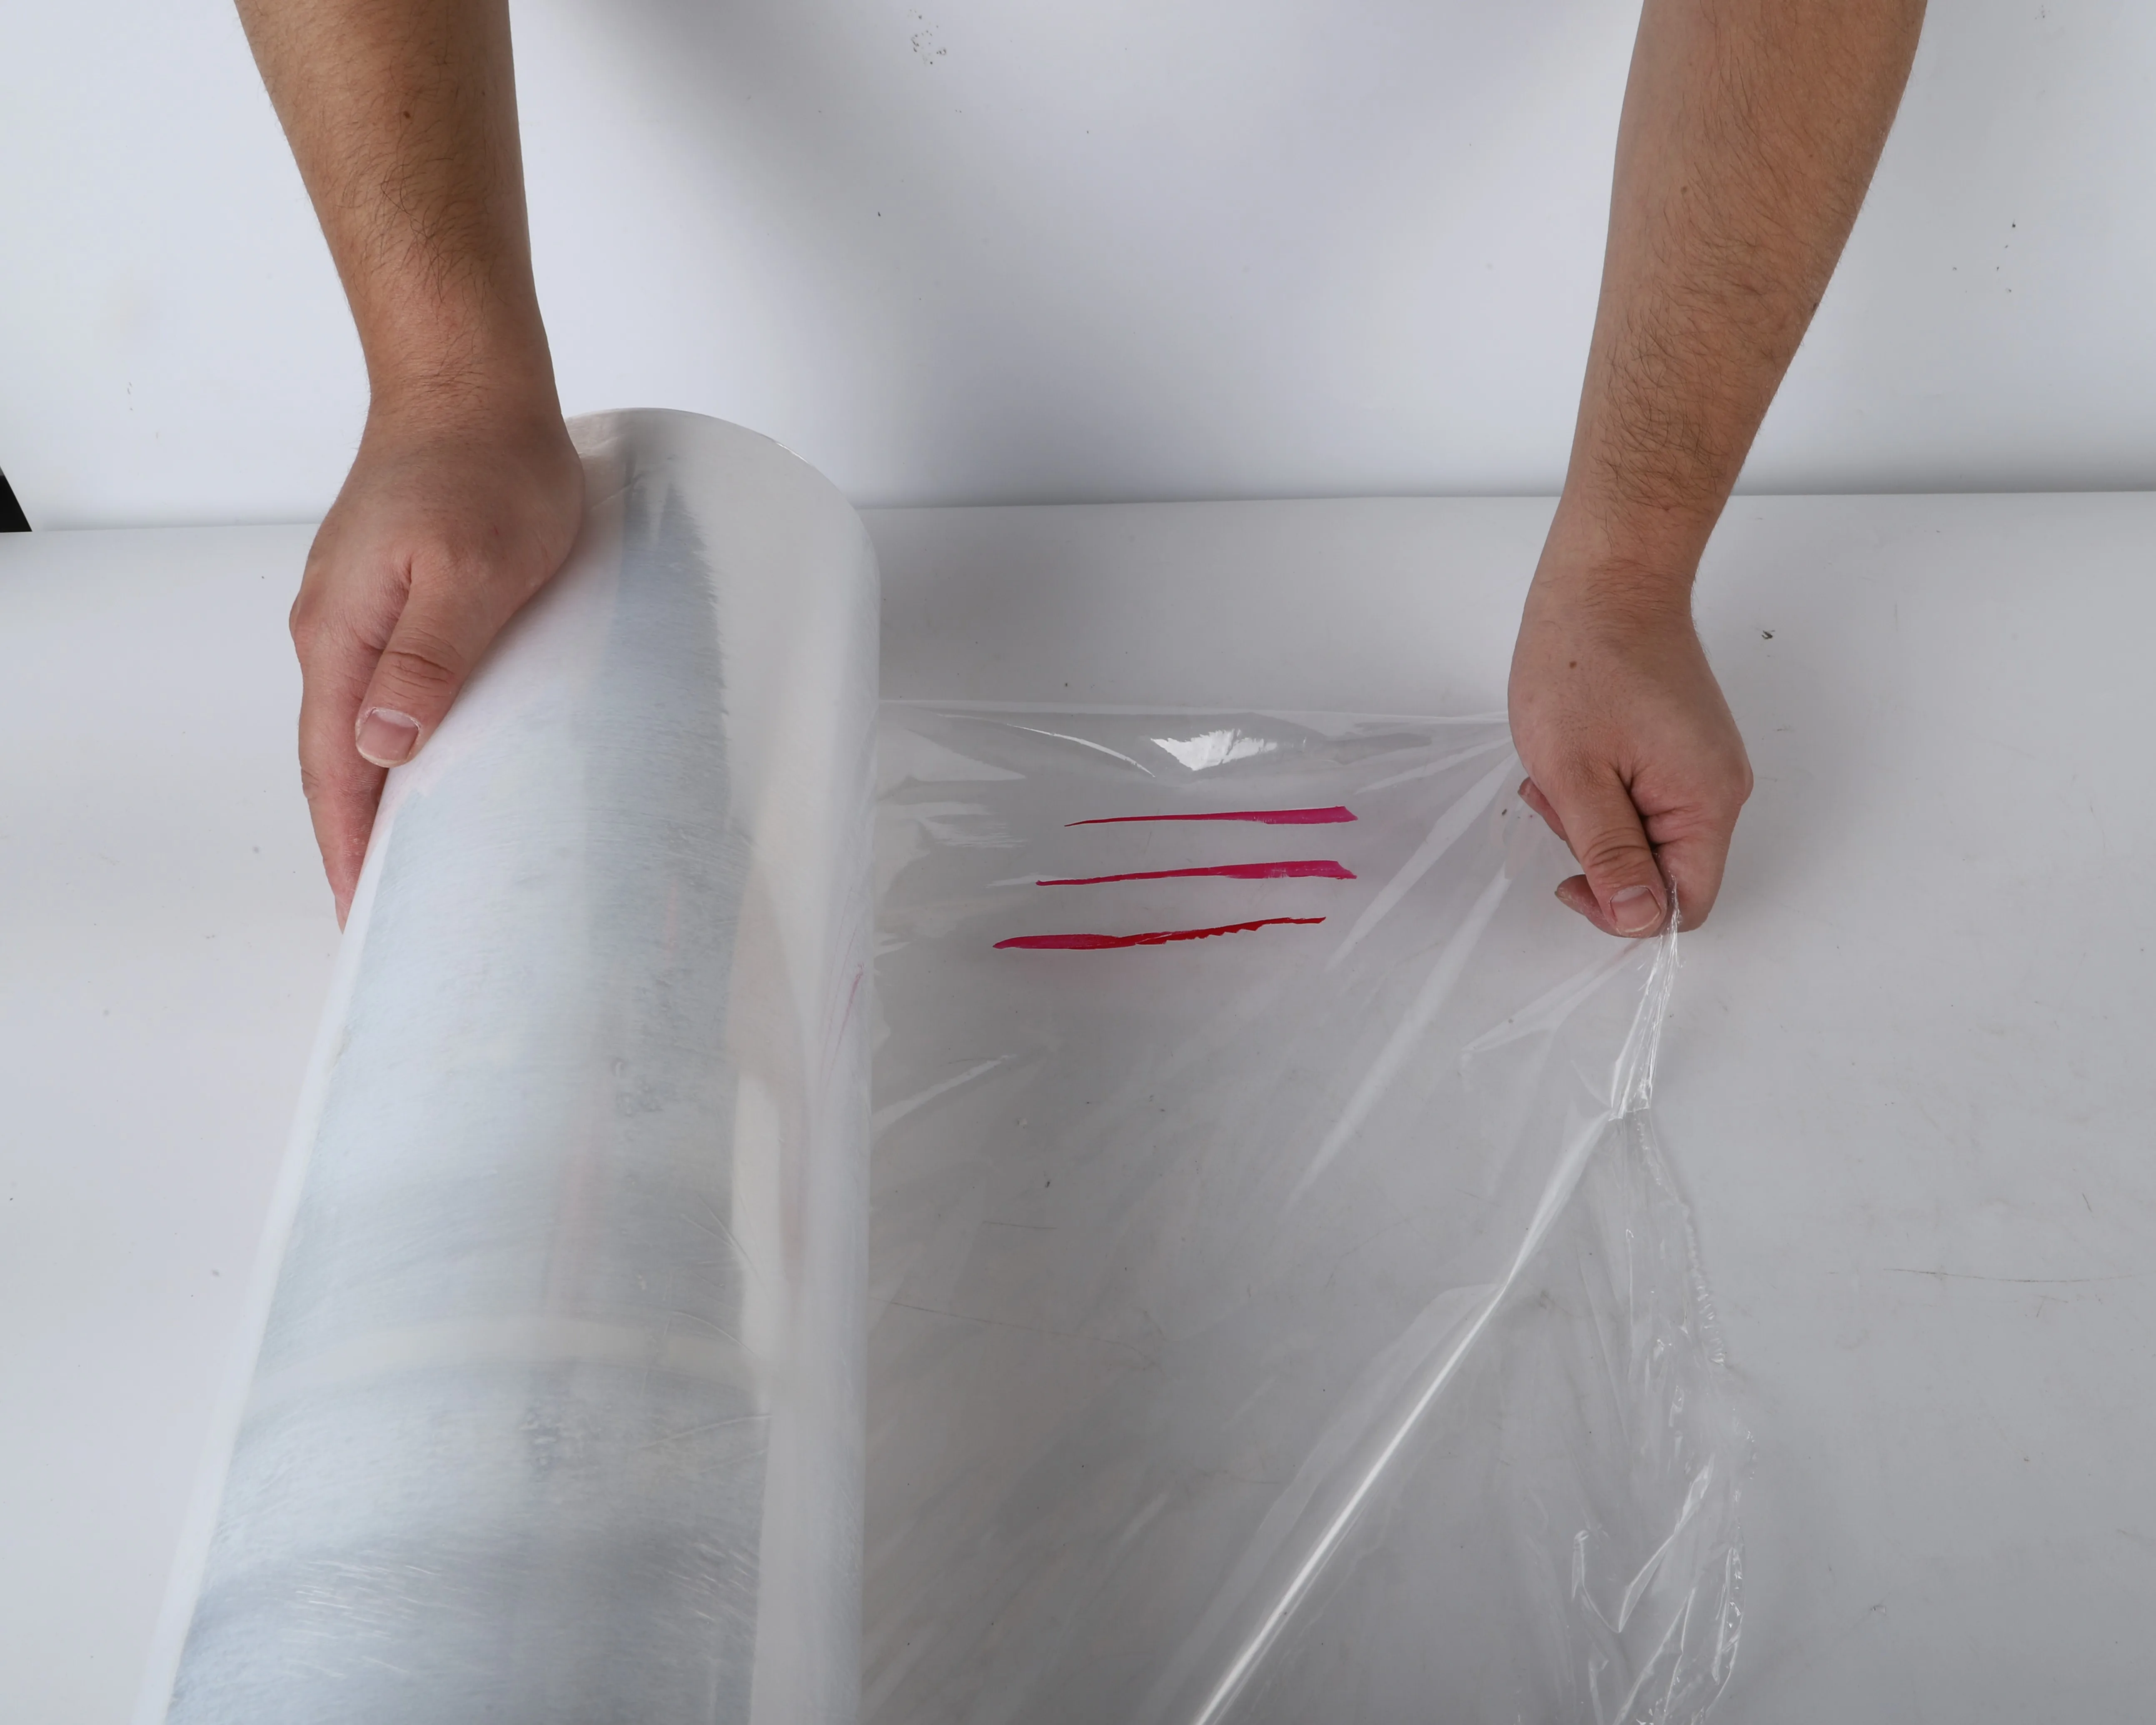 High Tensile  extended core Stretch Wrapping Film for manual